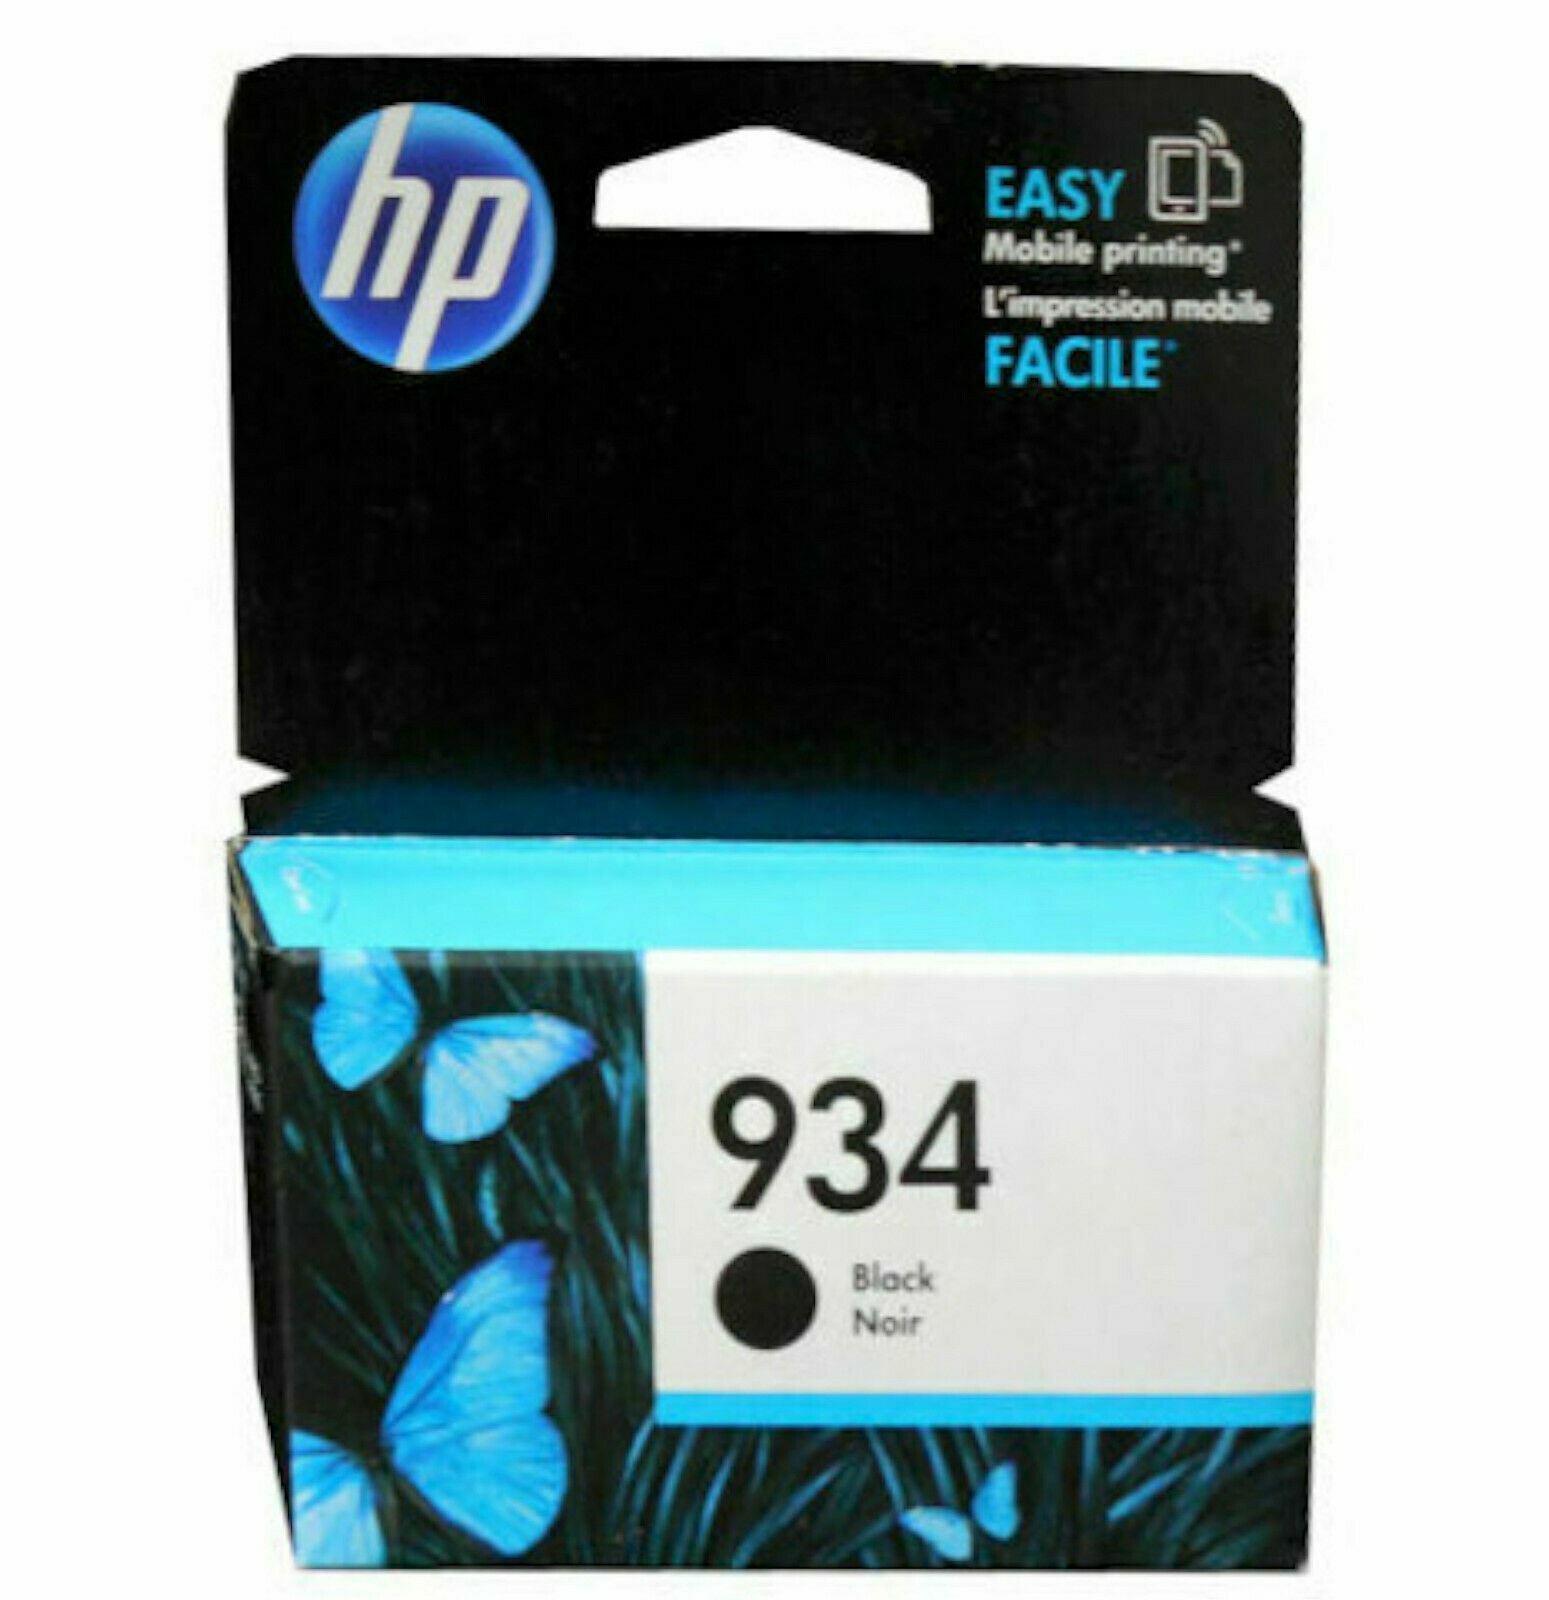 Primary image for NEW HP 934 Black Ink Cartridge for HP Officejet 6820 6835 6812 6815 6230 6830